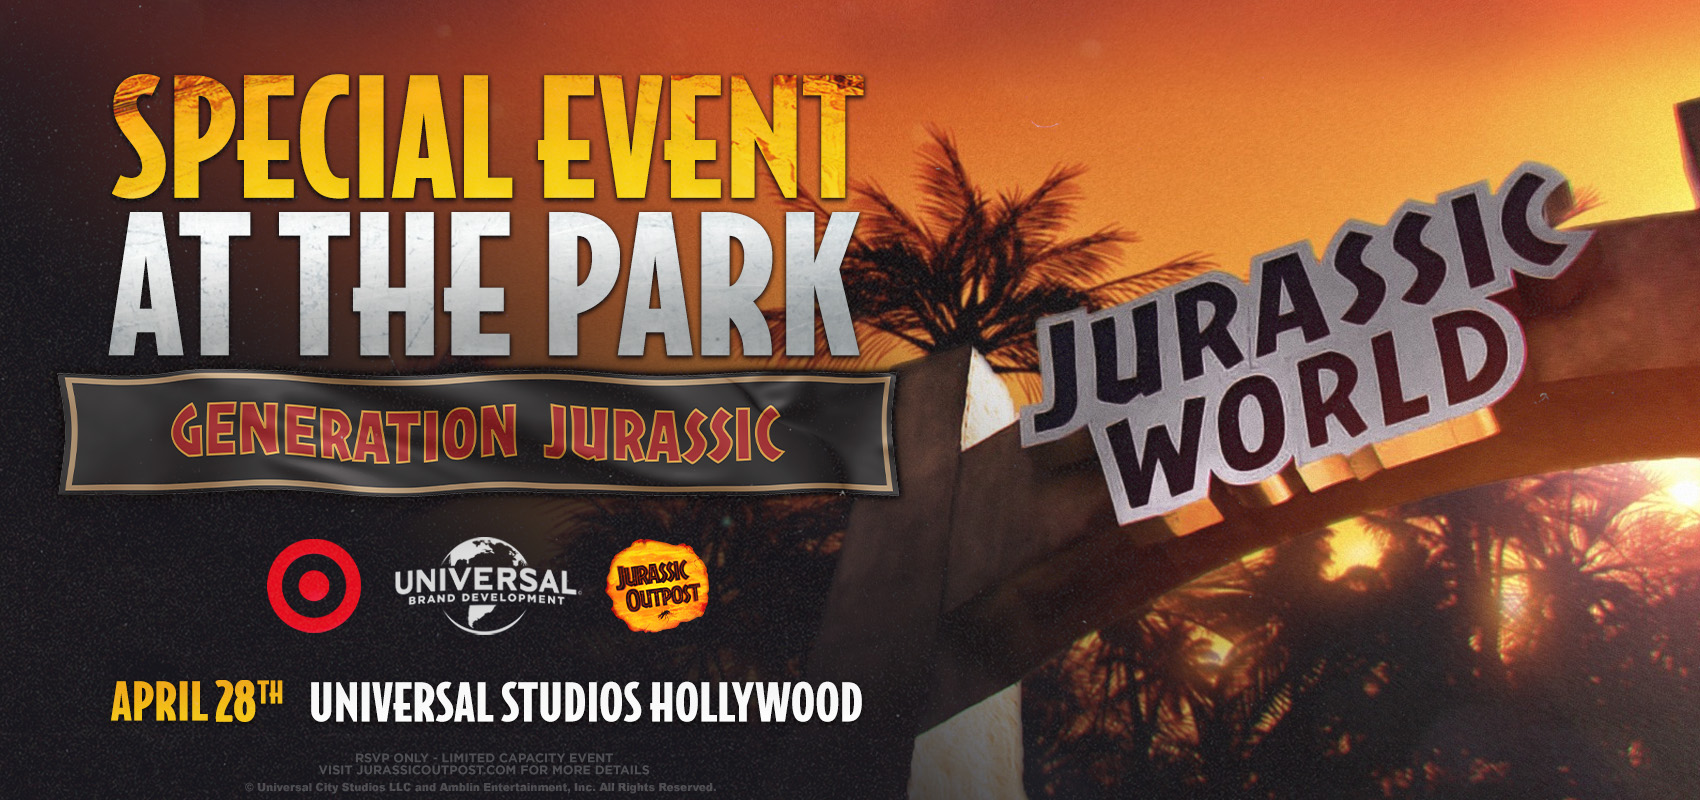 Tickets Now Available to ‘Generation Jurassic’ Event at Universal Studios Hollywood!